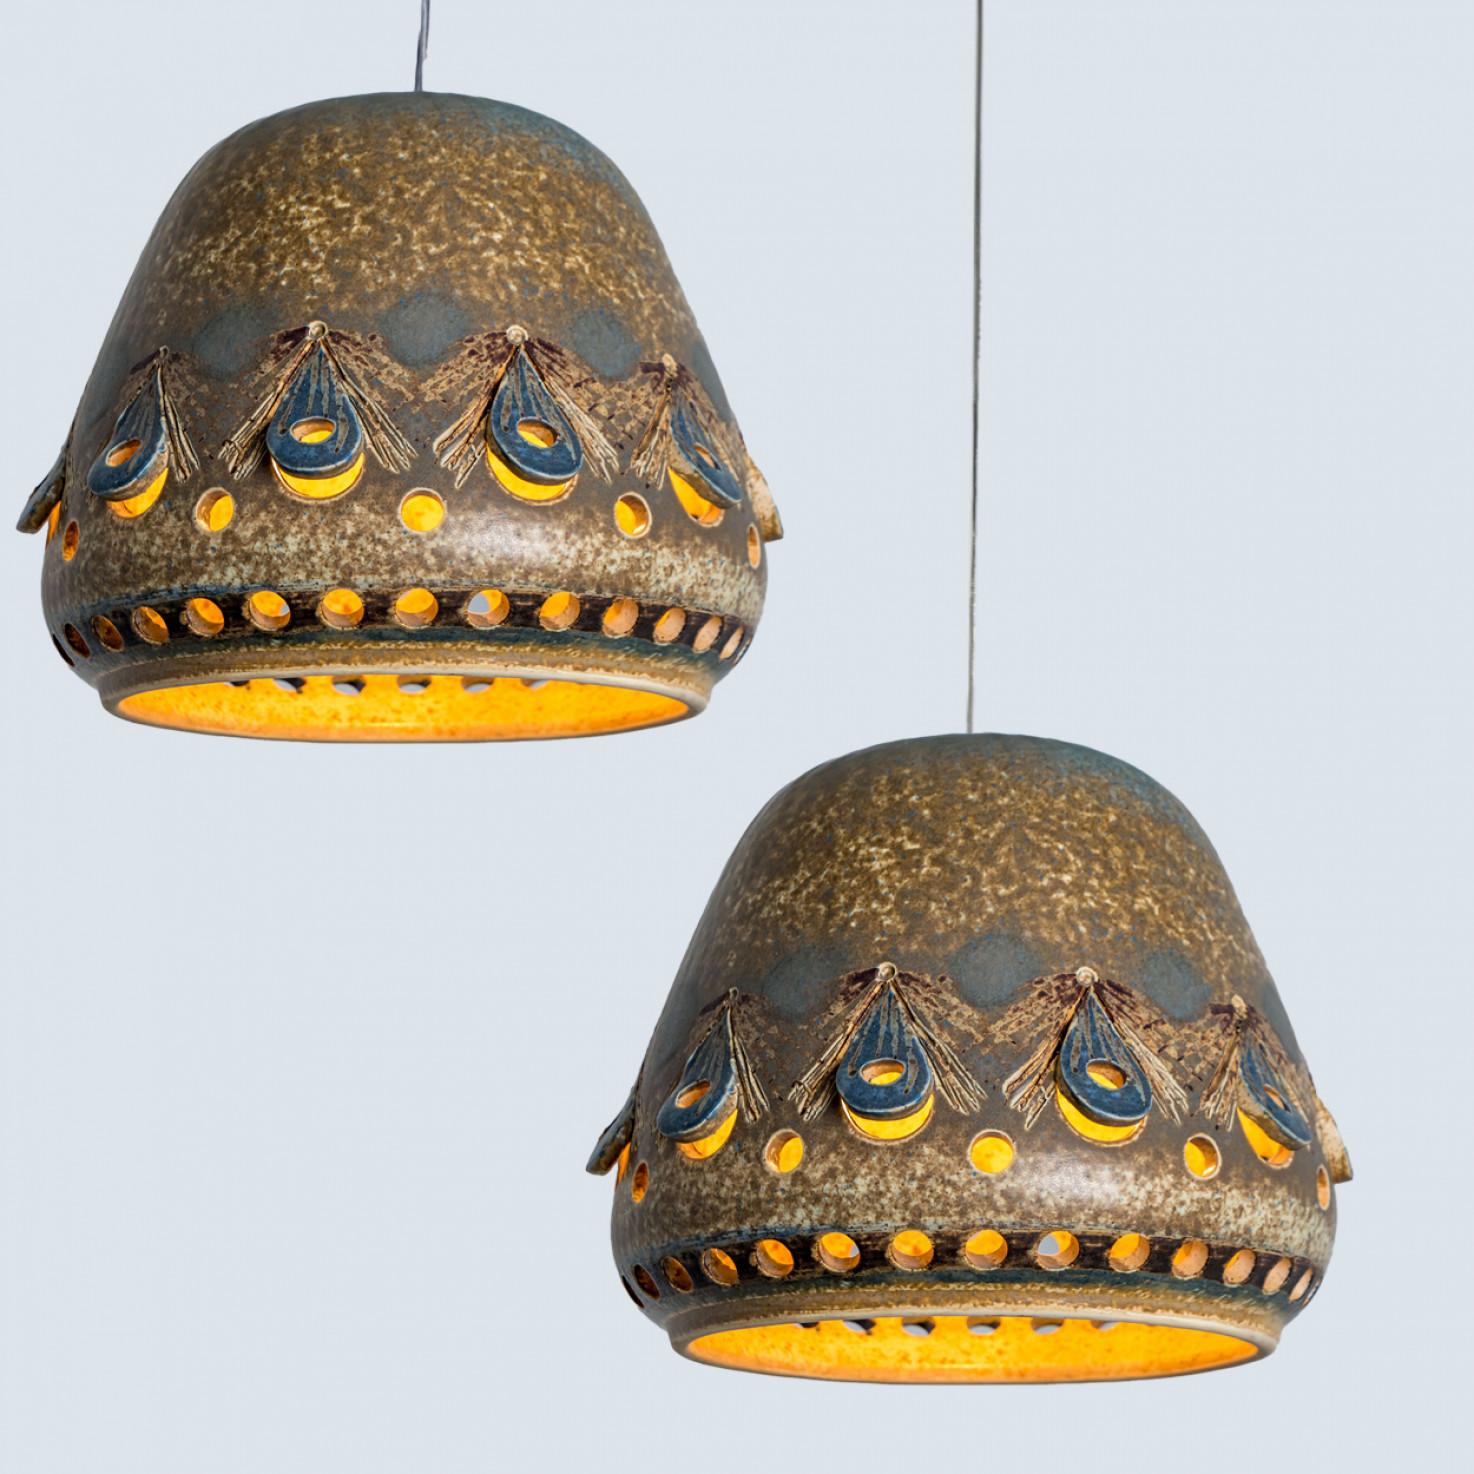 Stunning round pendant lamp with an unusual shape, made with rich colored brown and beige ceramics, manufactured in the 1970s in Denmark.

Dimensions:
Diameter: 11.81